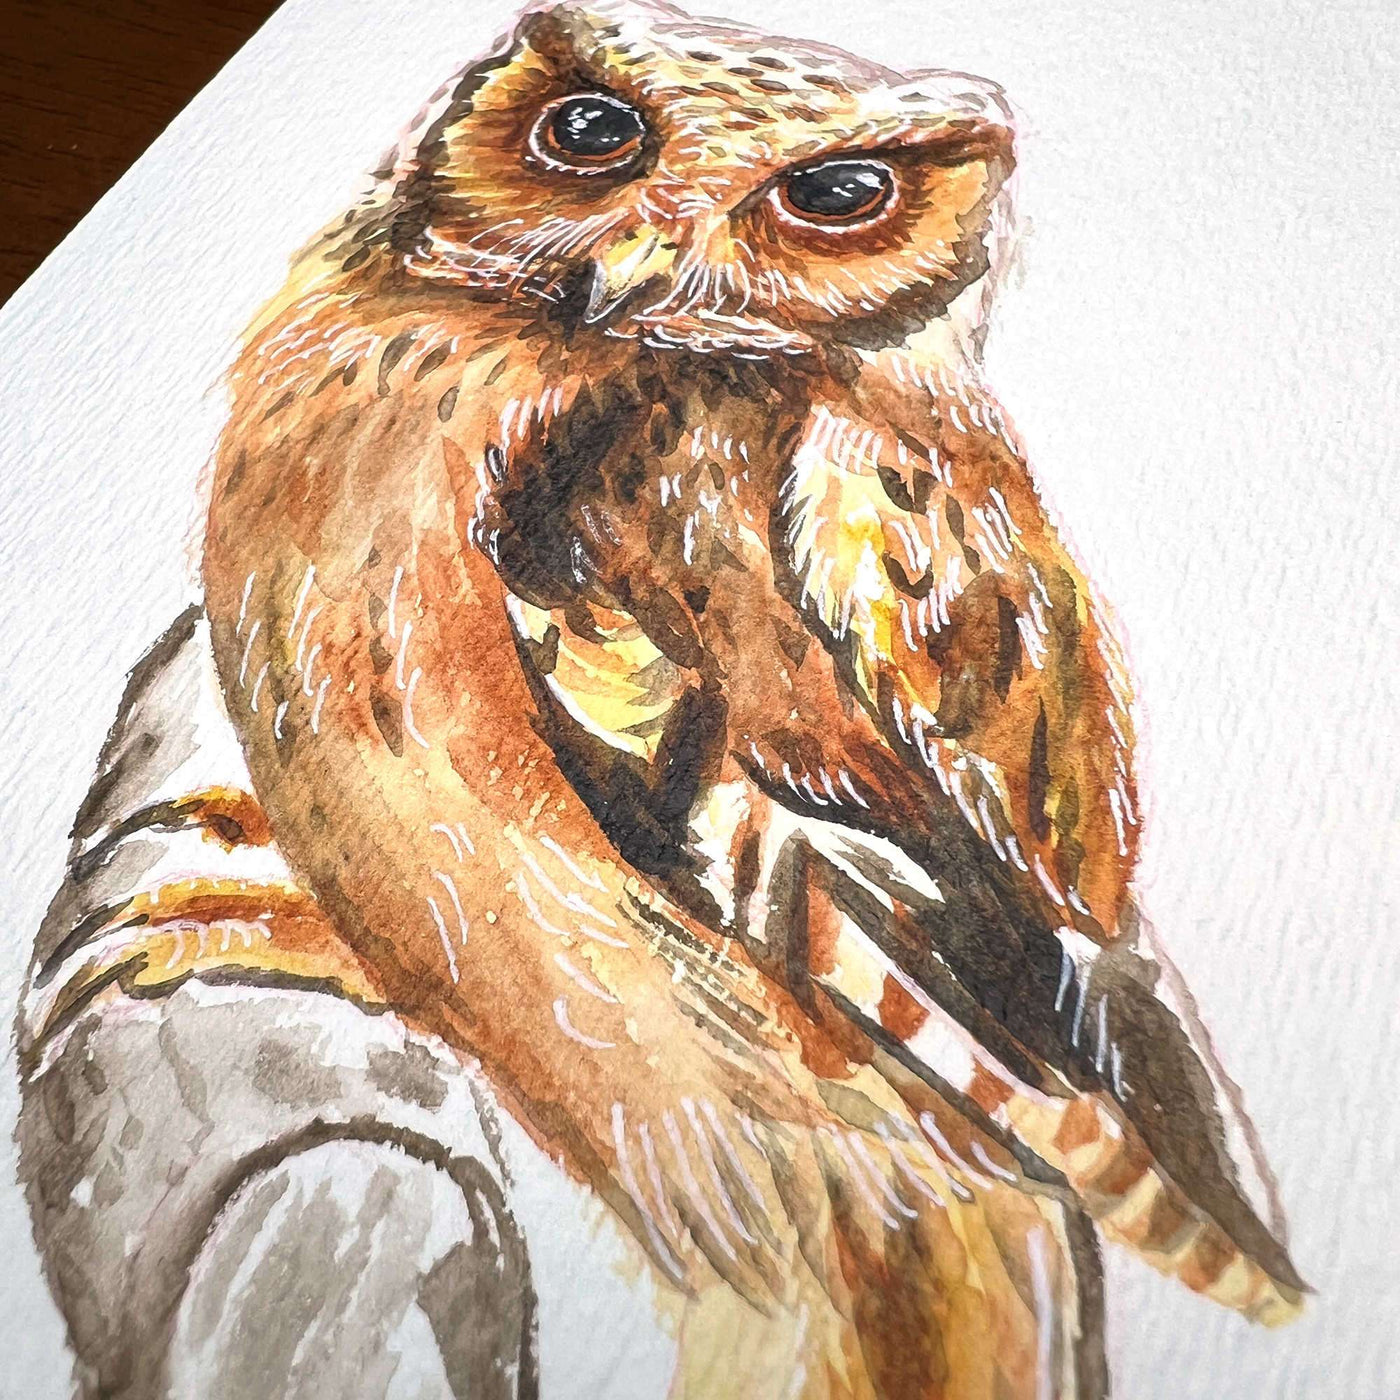 Close-up view of a watercolor owl painting showing the intricate detail of an owl's feathers and eyes.